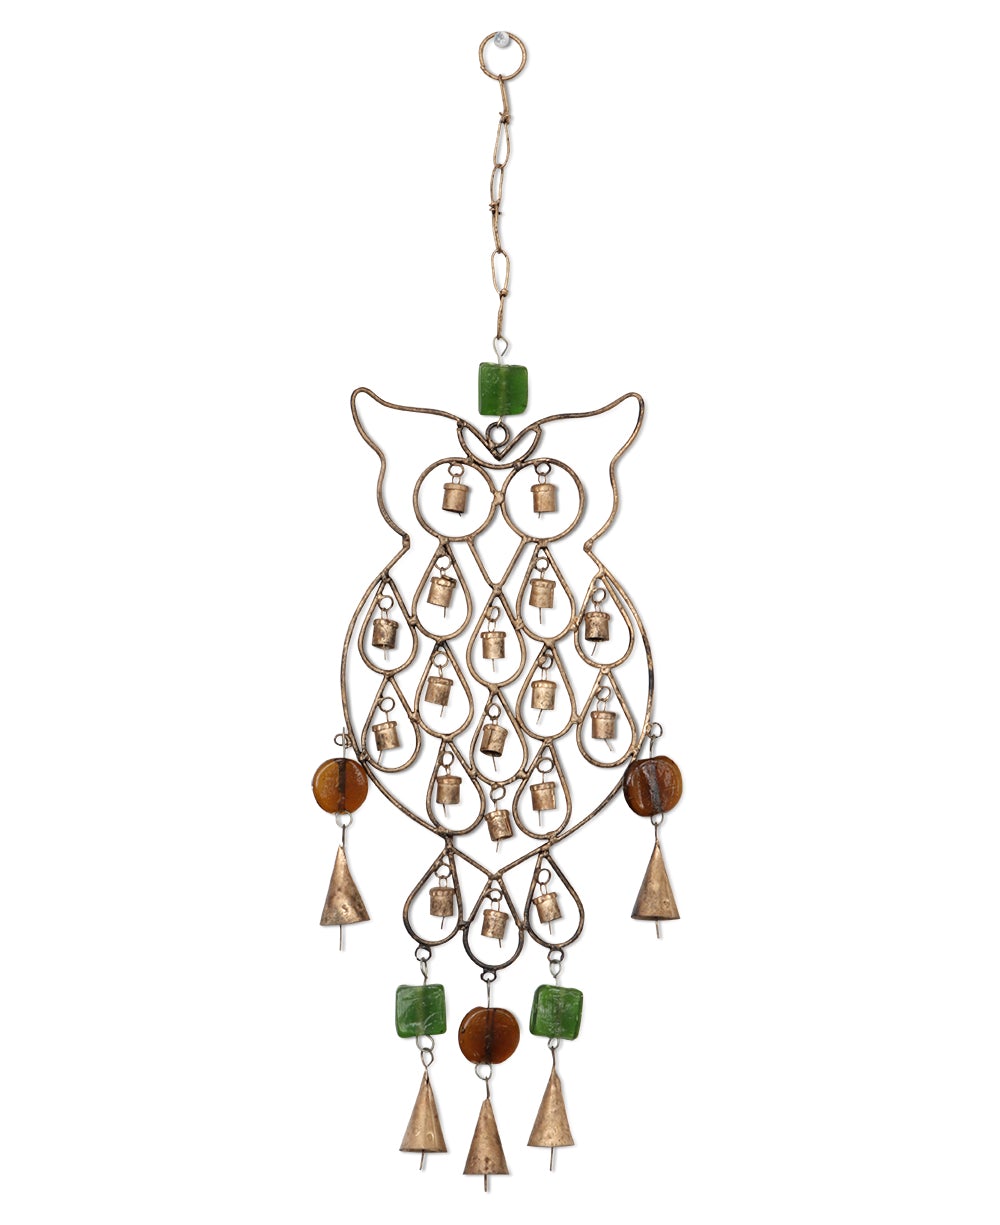 Rustic Finish Wise Owl Wall Hanging Chime, Recycled Metal - Wind Chimes